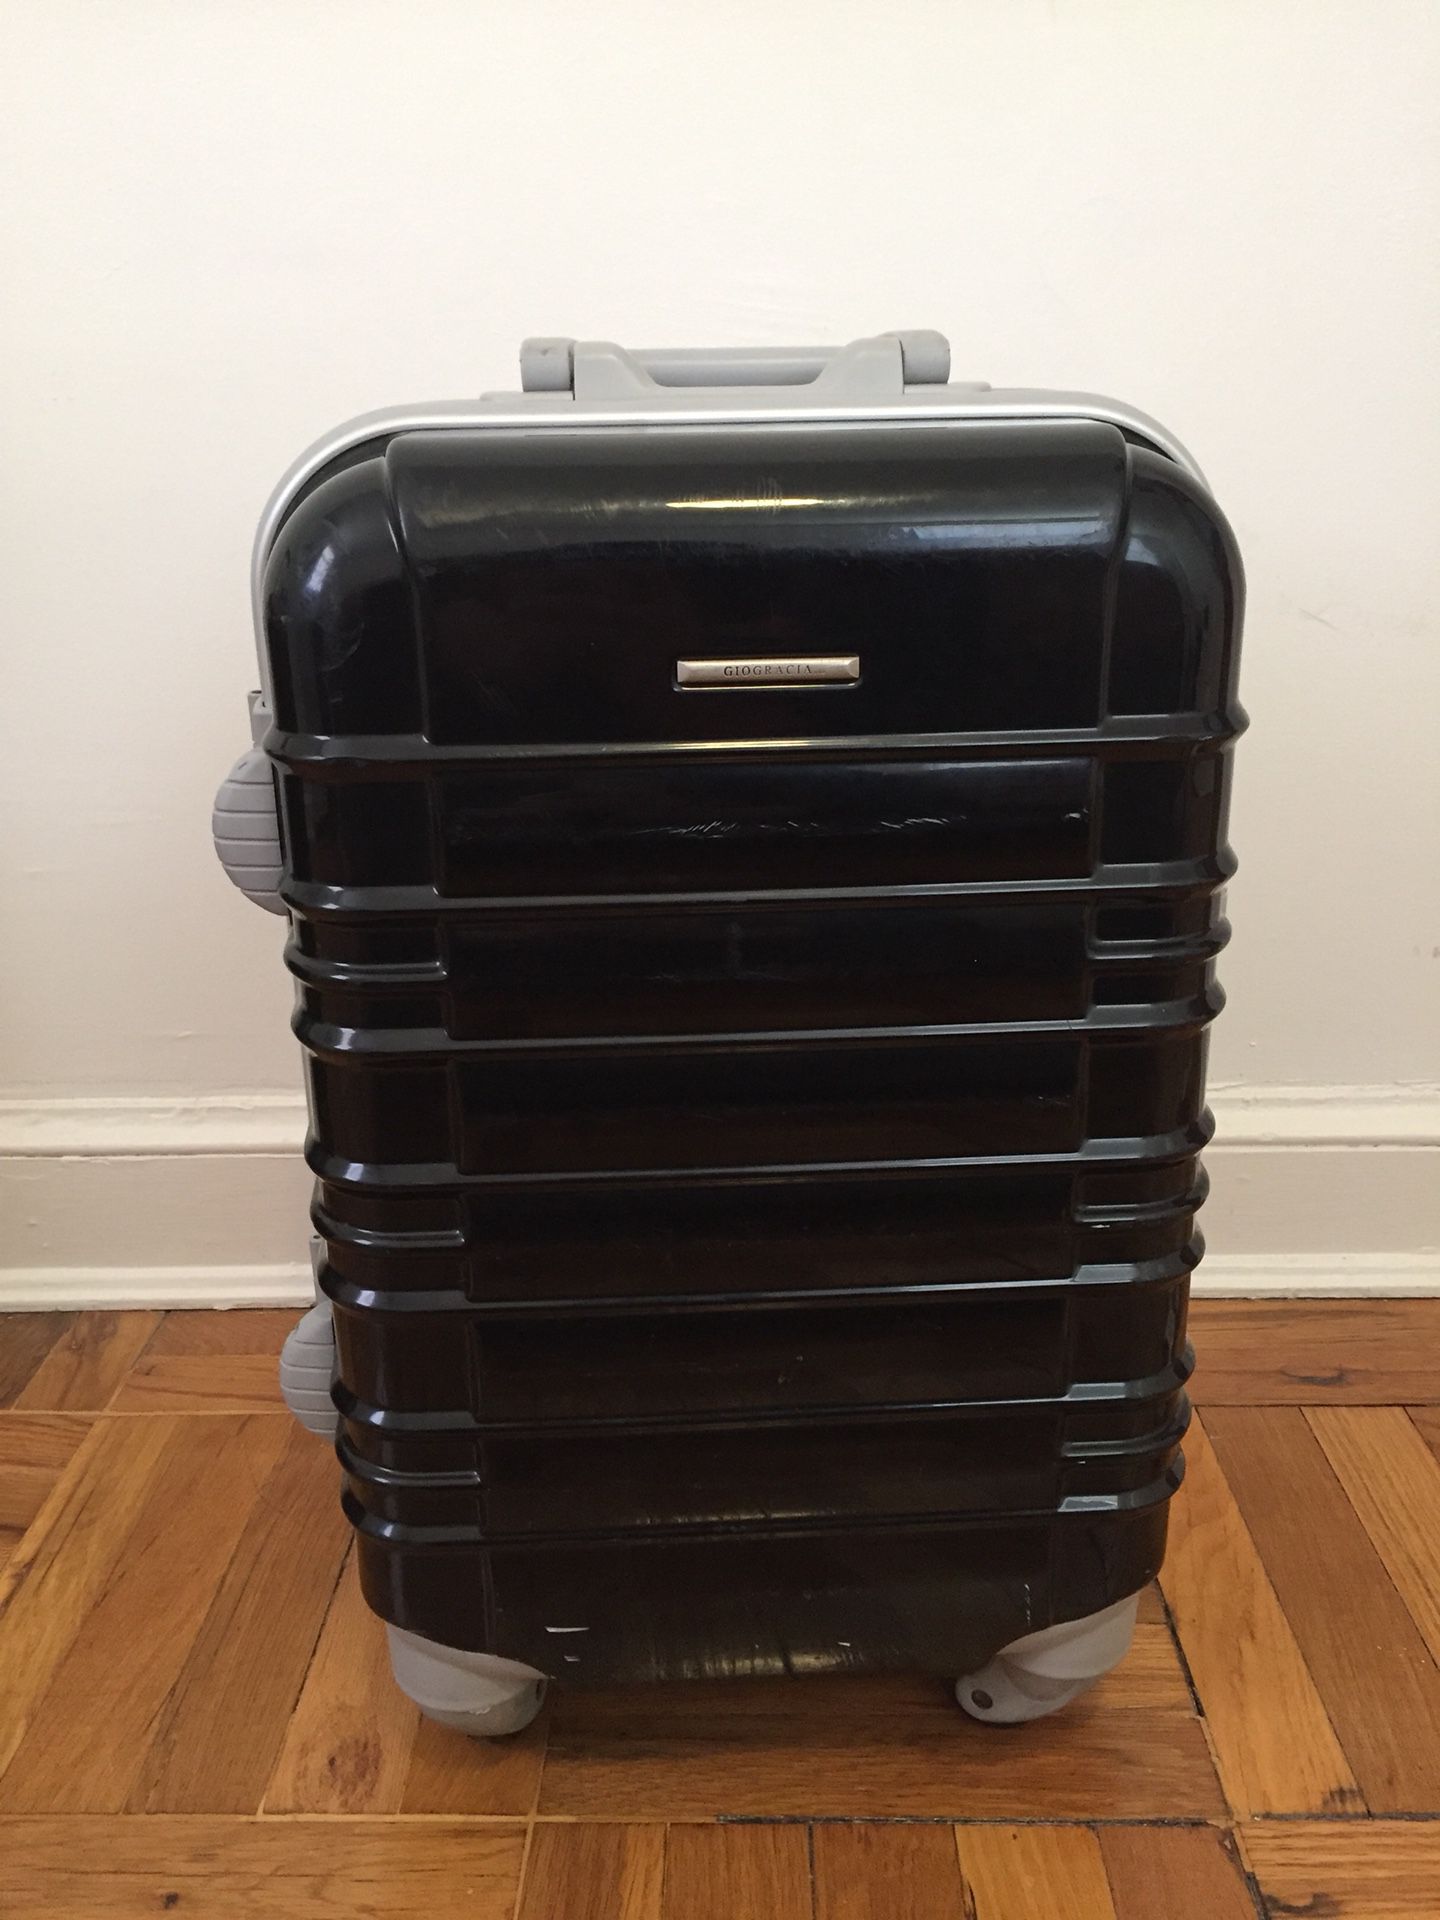 Black carry-on luggage